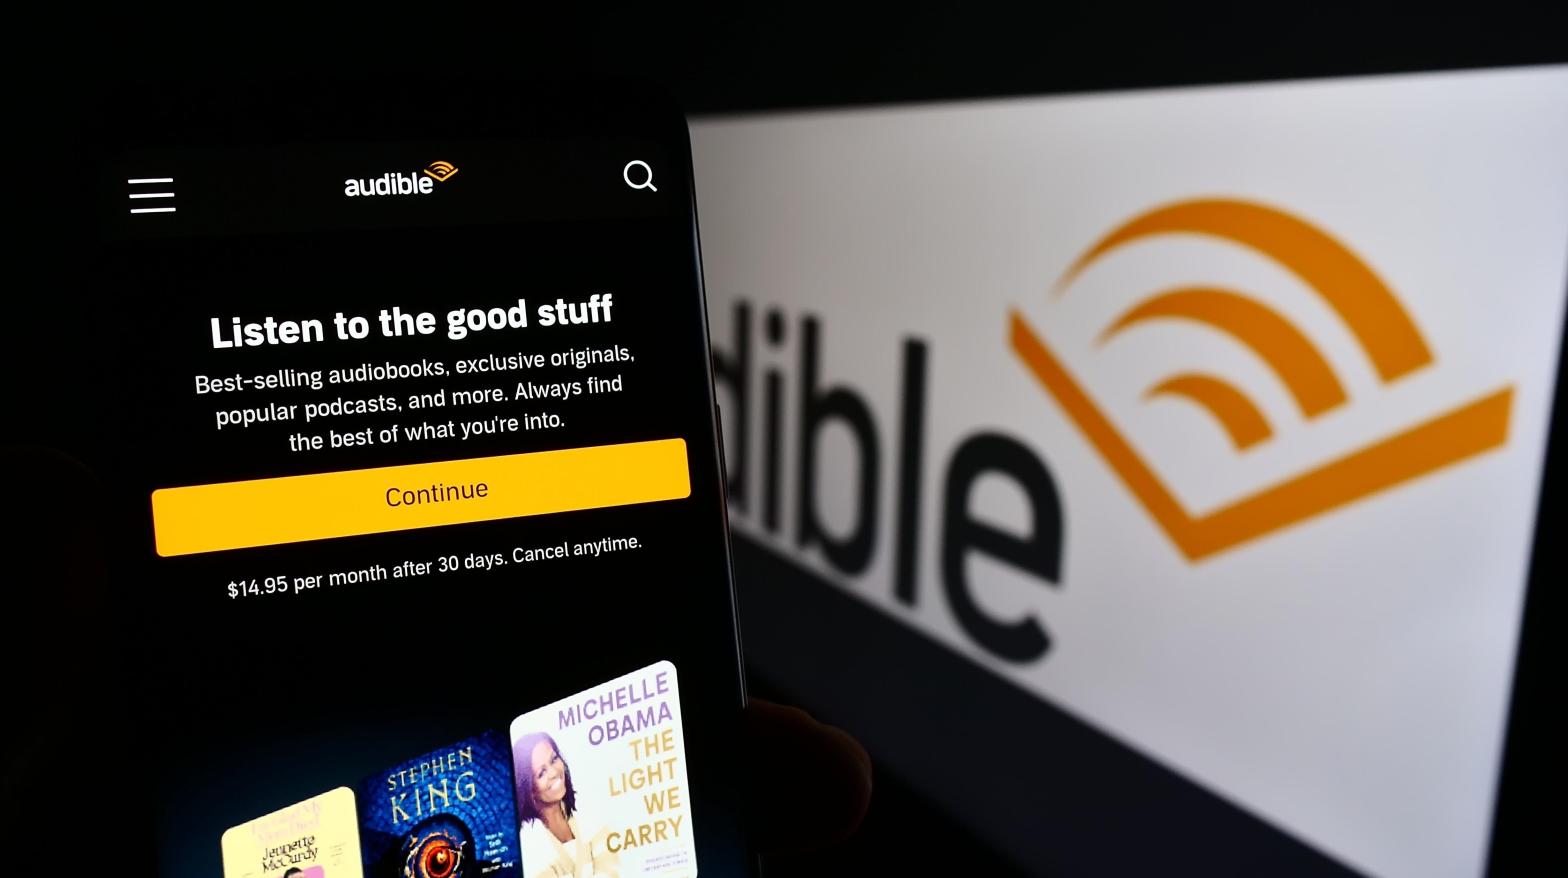 Audible is testing advertisements on some audiobooks and podcasts, though it currently remains unclear which 'free' titles have ads and which don't. (Photo: T. Schneider, Shutterstock)